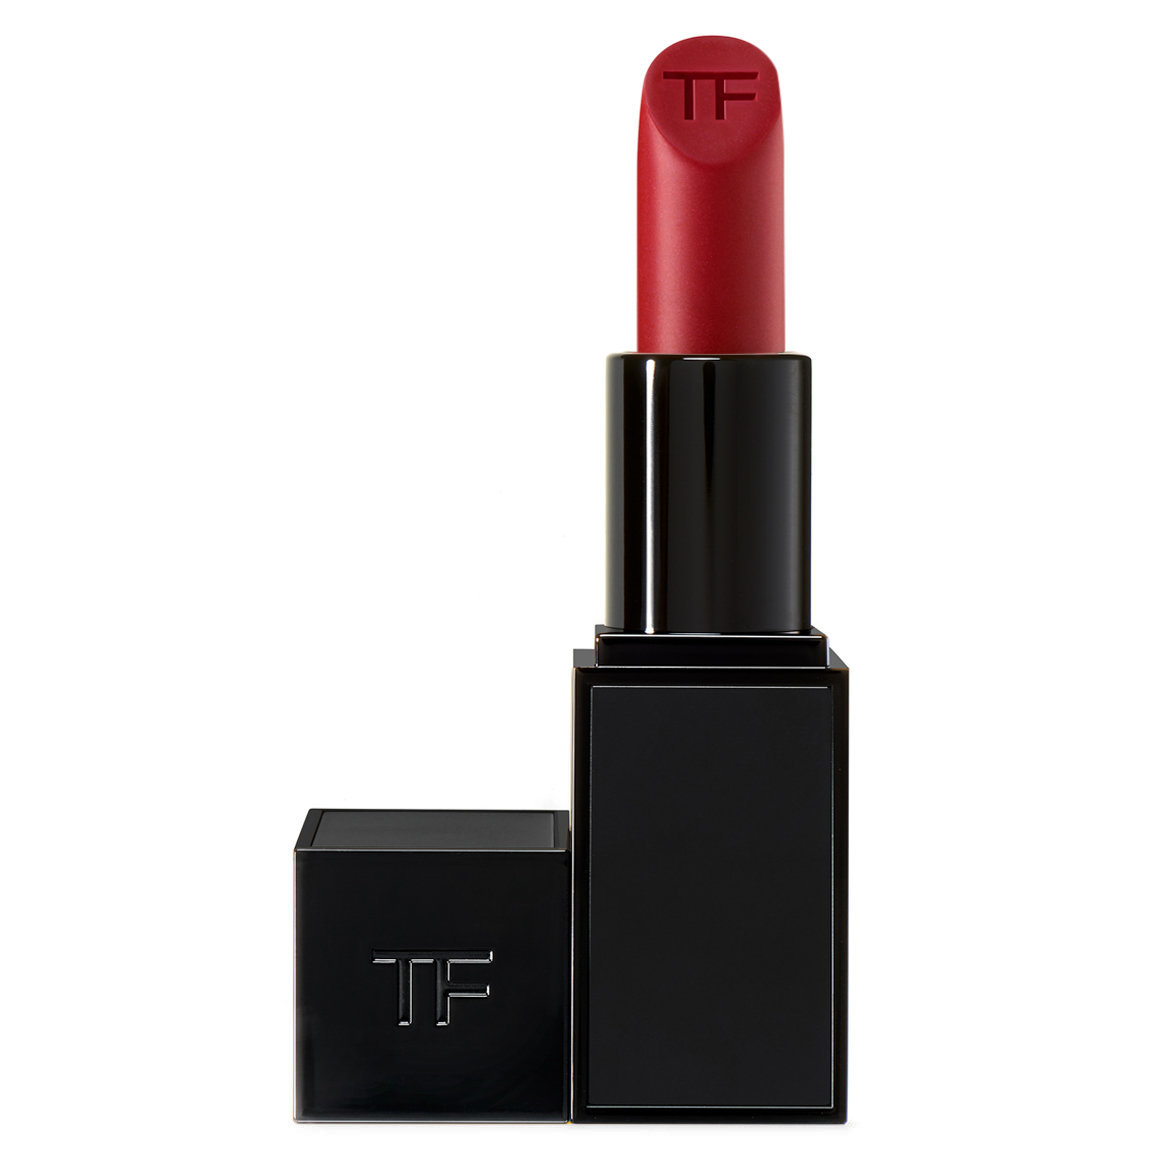 TOM FORD Fucking Fabulous Lip Color alternative view 1 - product swatch.